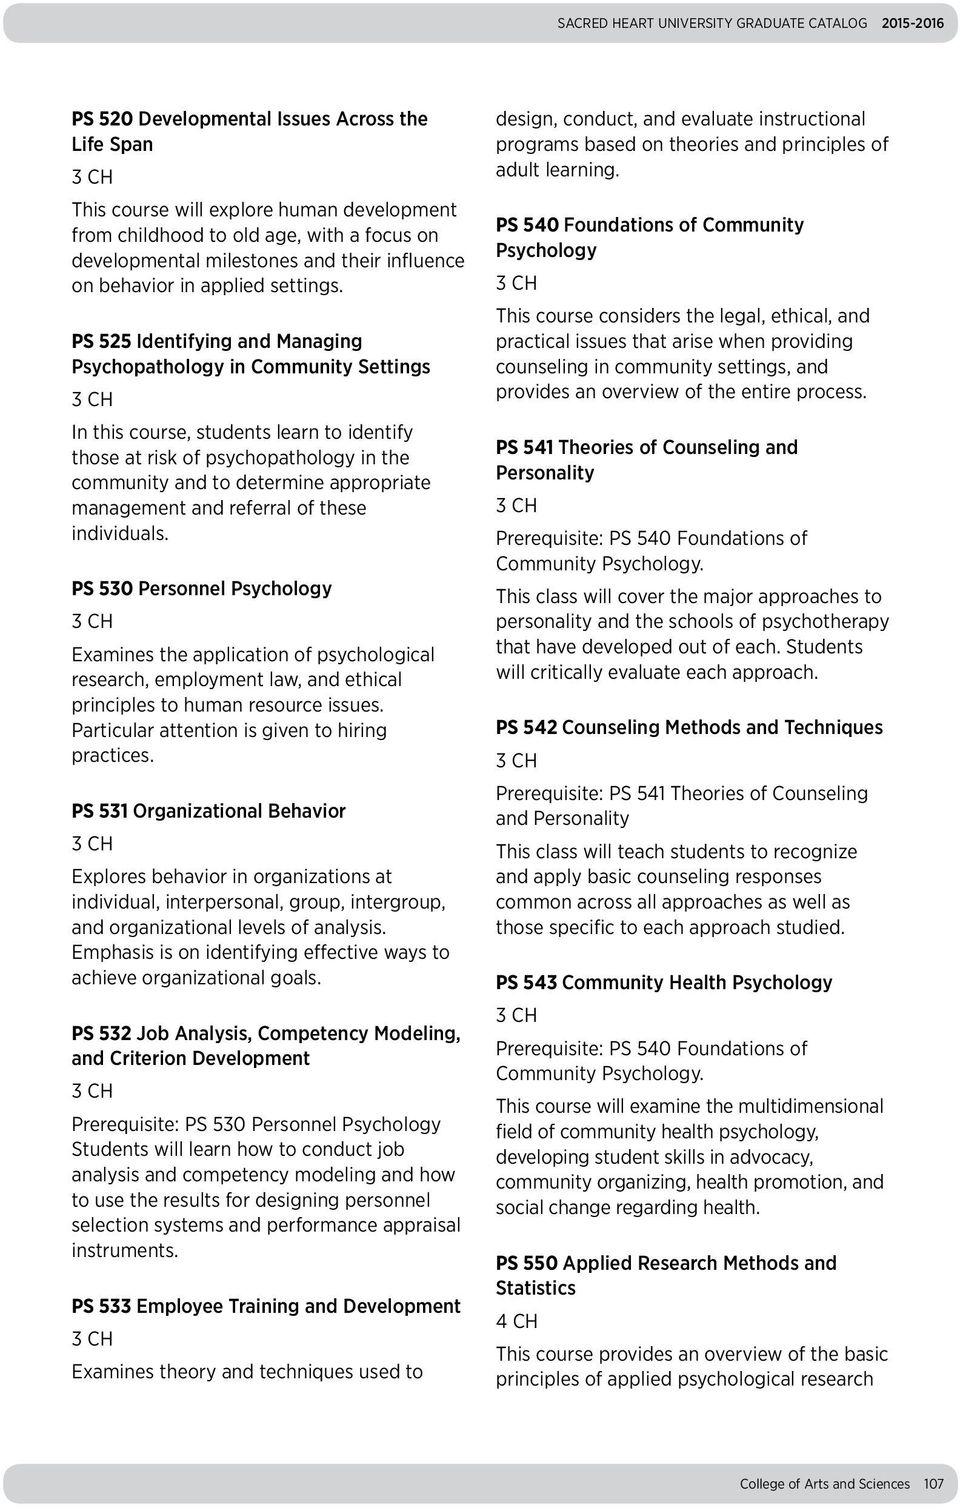 PS 525 Identifying and Managing Psychopathology in Community Settings In this course, students learn to identify those at risk of psychopathology in the community and to determine appropriate